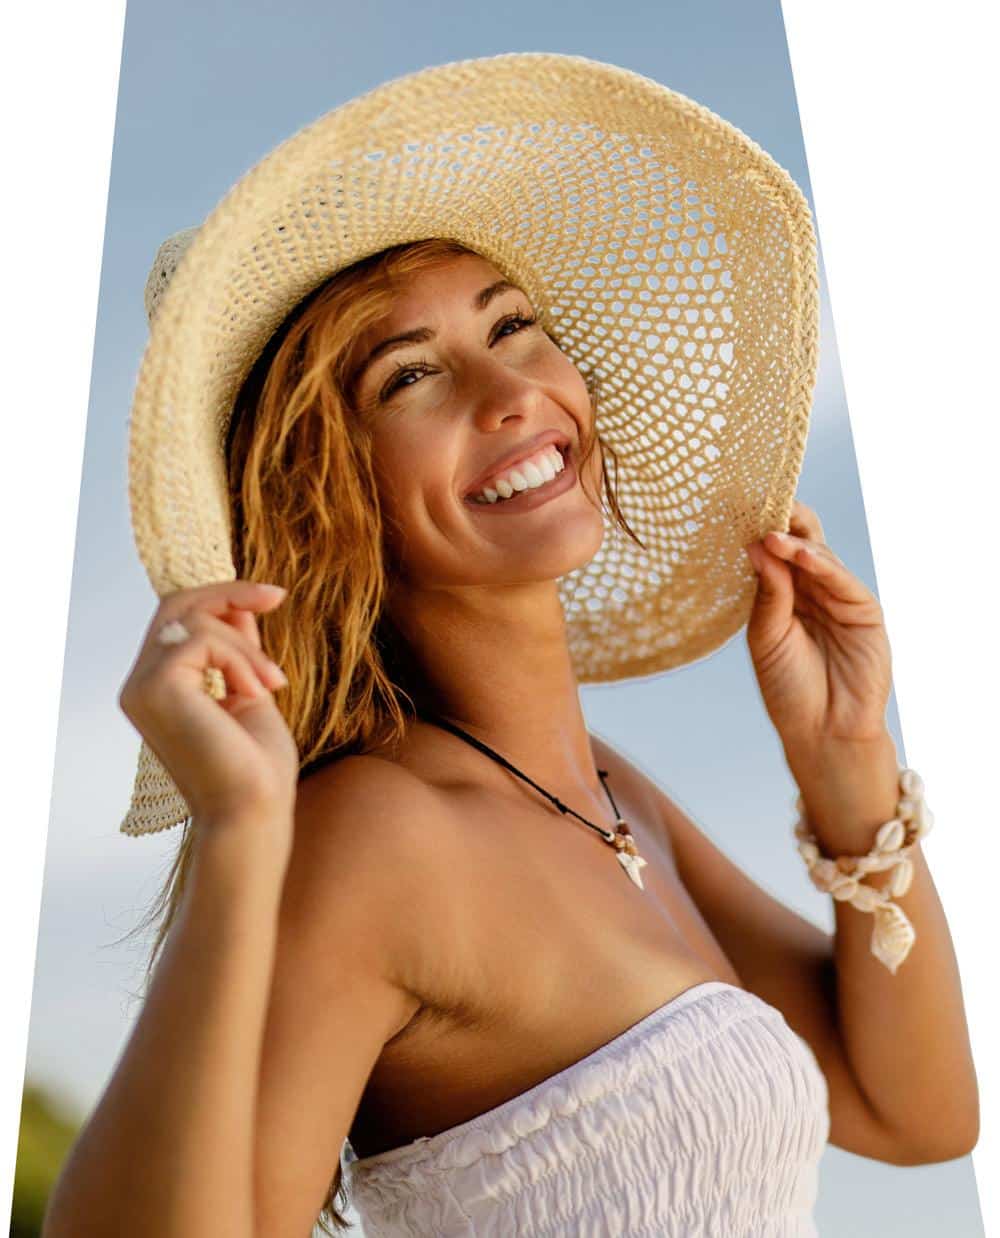 Pros and Cons of Summer Plastic Surgery